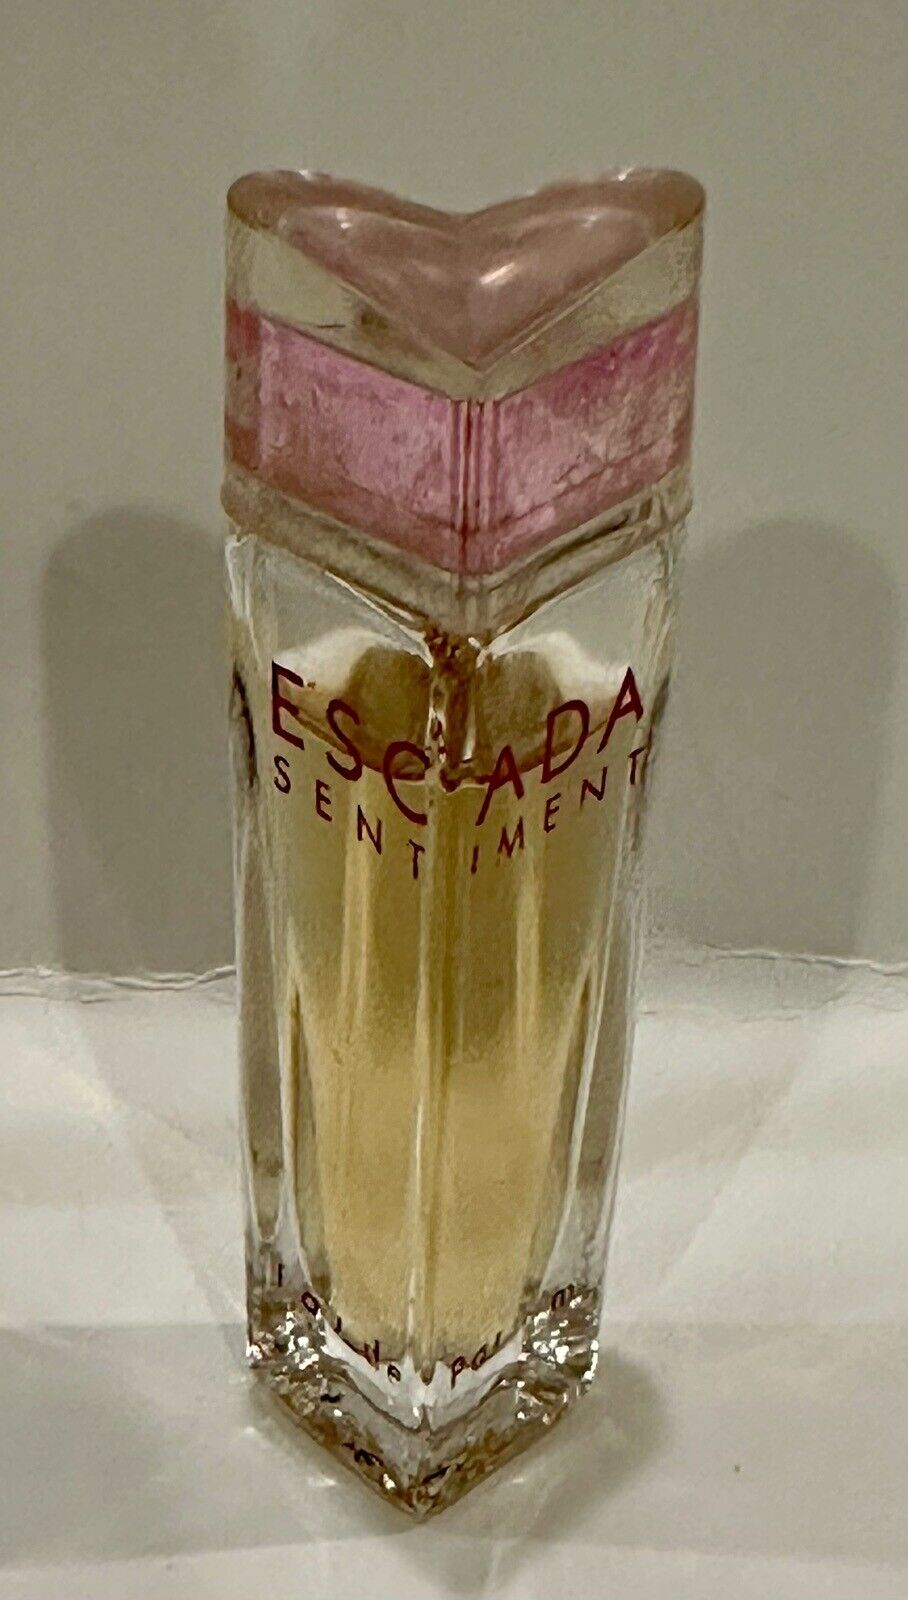 Escada Sentiment Perfume For Women 0.14 Discontinued Floral Fruity